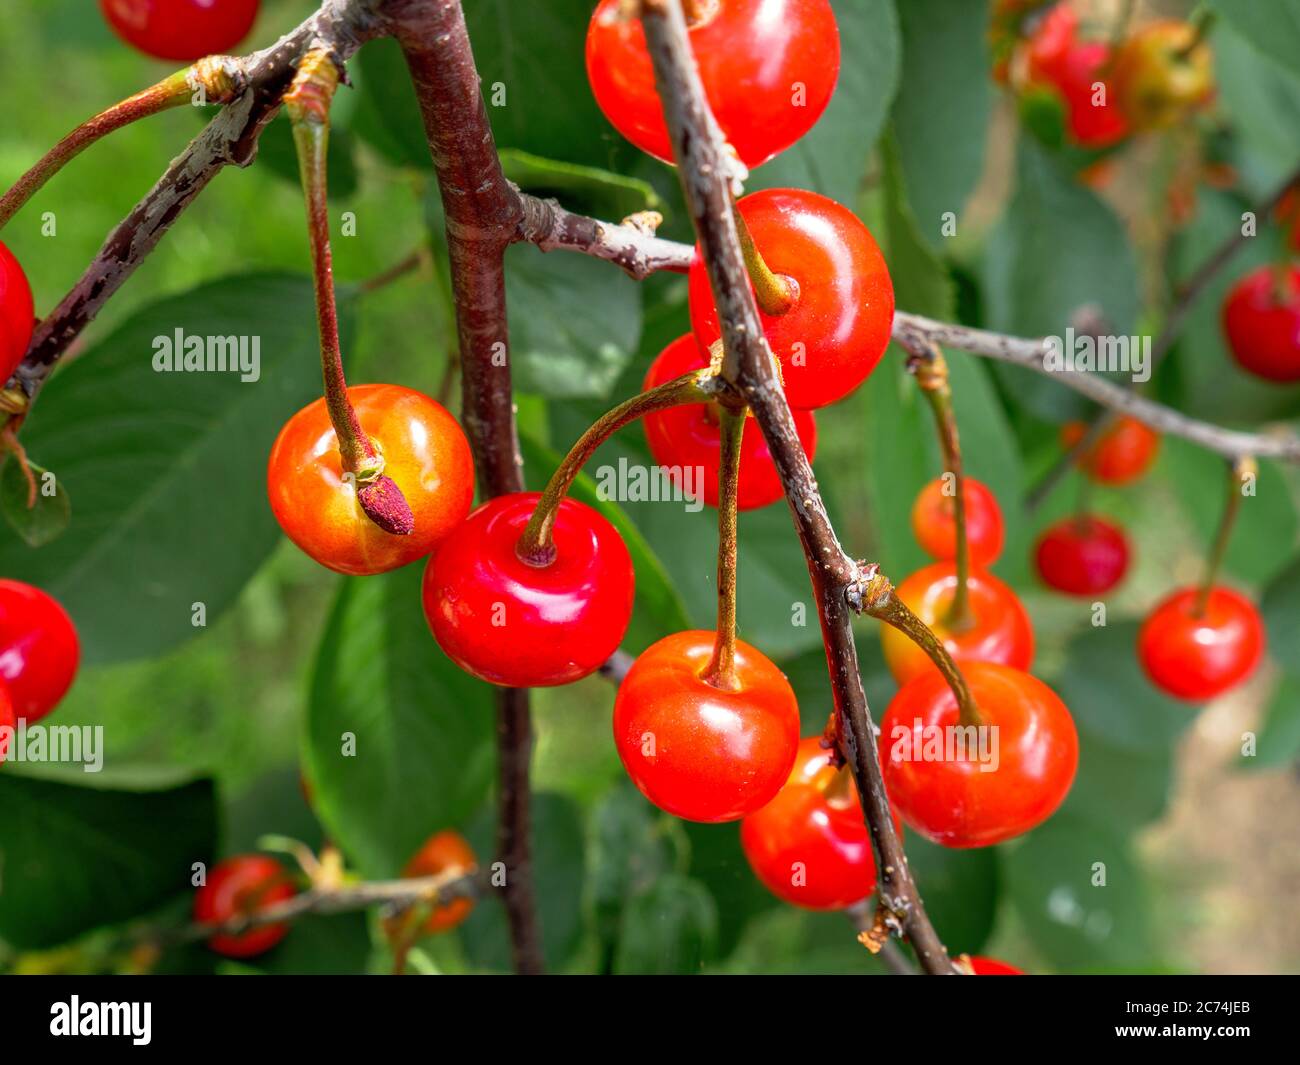 A bunch of unripe red and orange cherries hanging on a branch of a young fruit tree in the garden on a sunny day. Stock Photo